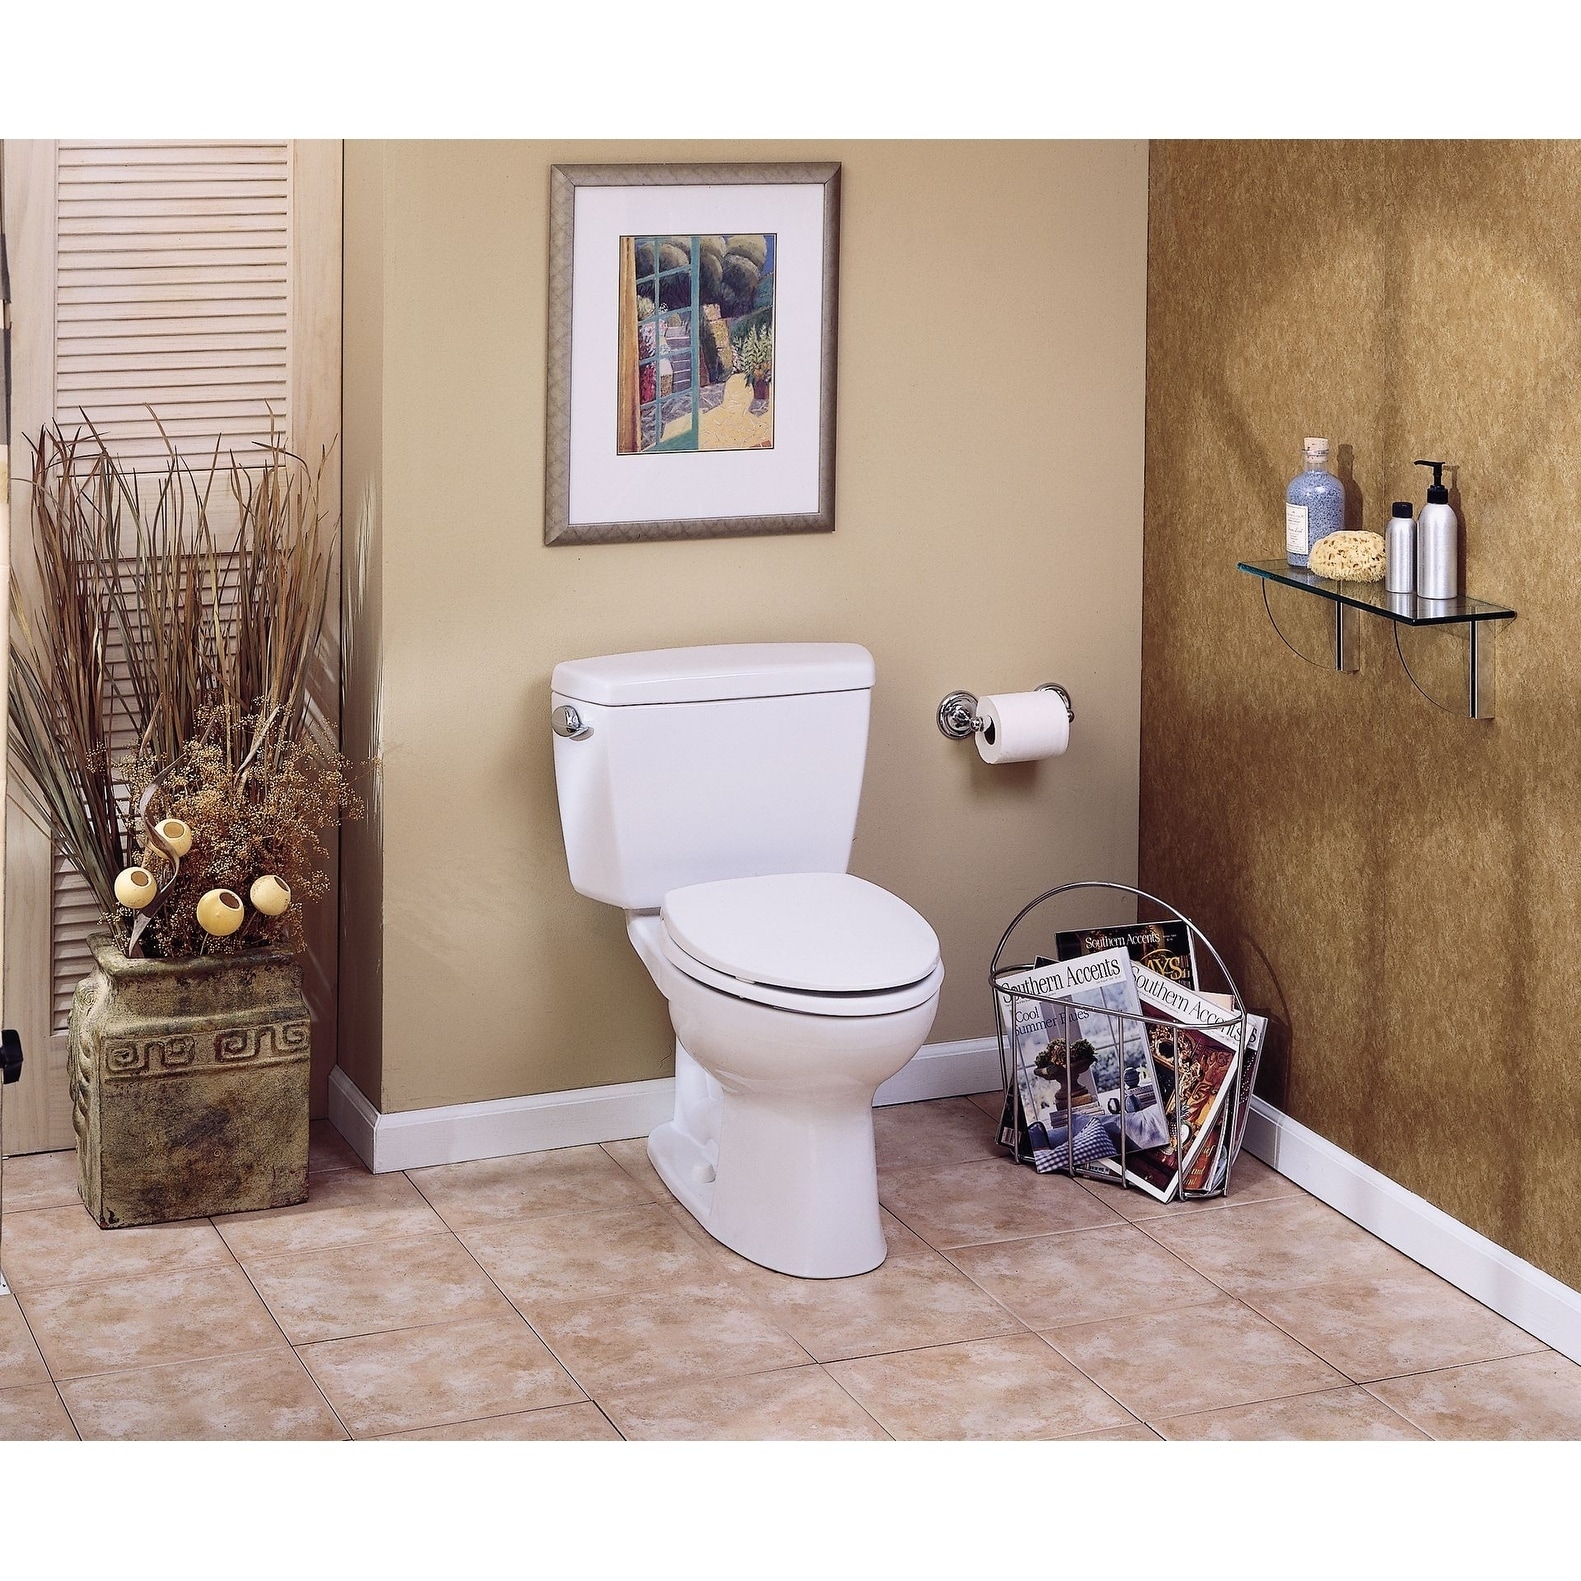 https://ak1.ostkcdn.com/images/products/8884371/Toto-Drake-Two-Piece-Elongated-1.6-GPF-ADA-Compliant-Toilet-Cotton-White-CST744SL-01-980258ca-369b-463b-a02b-c80d10f6d3af.jpg